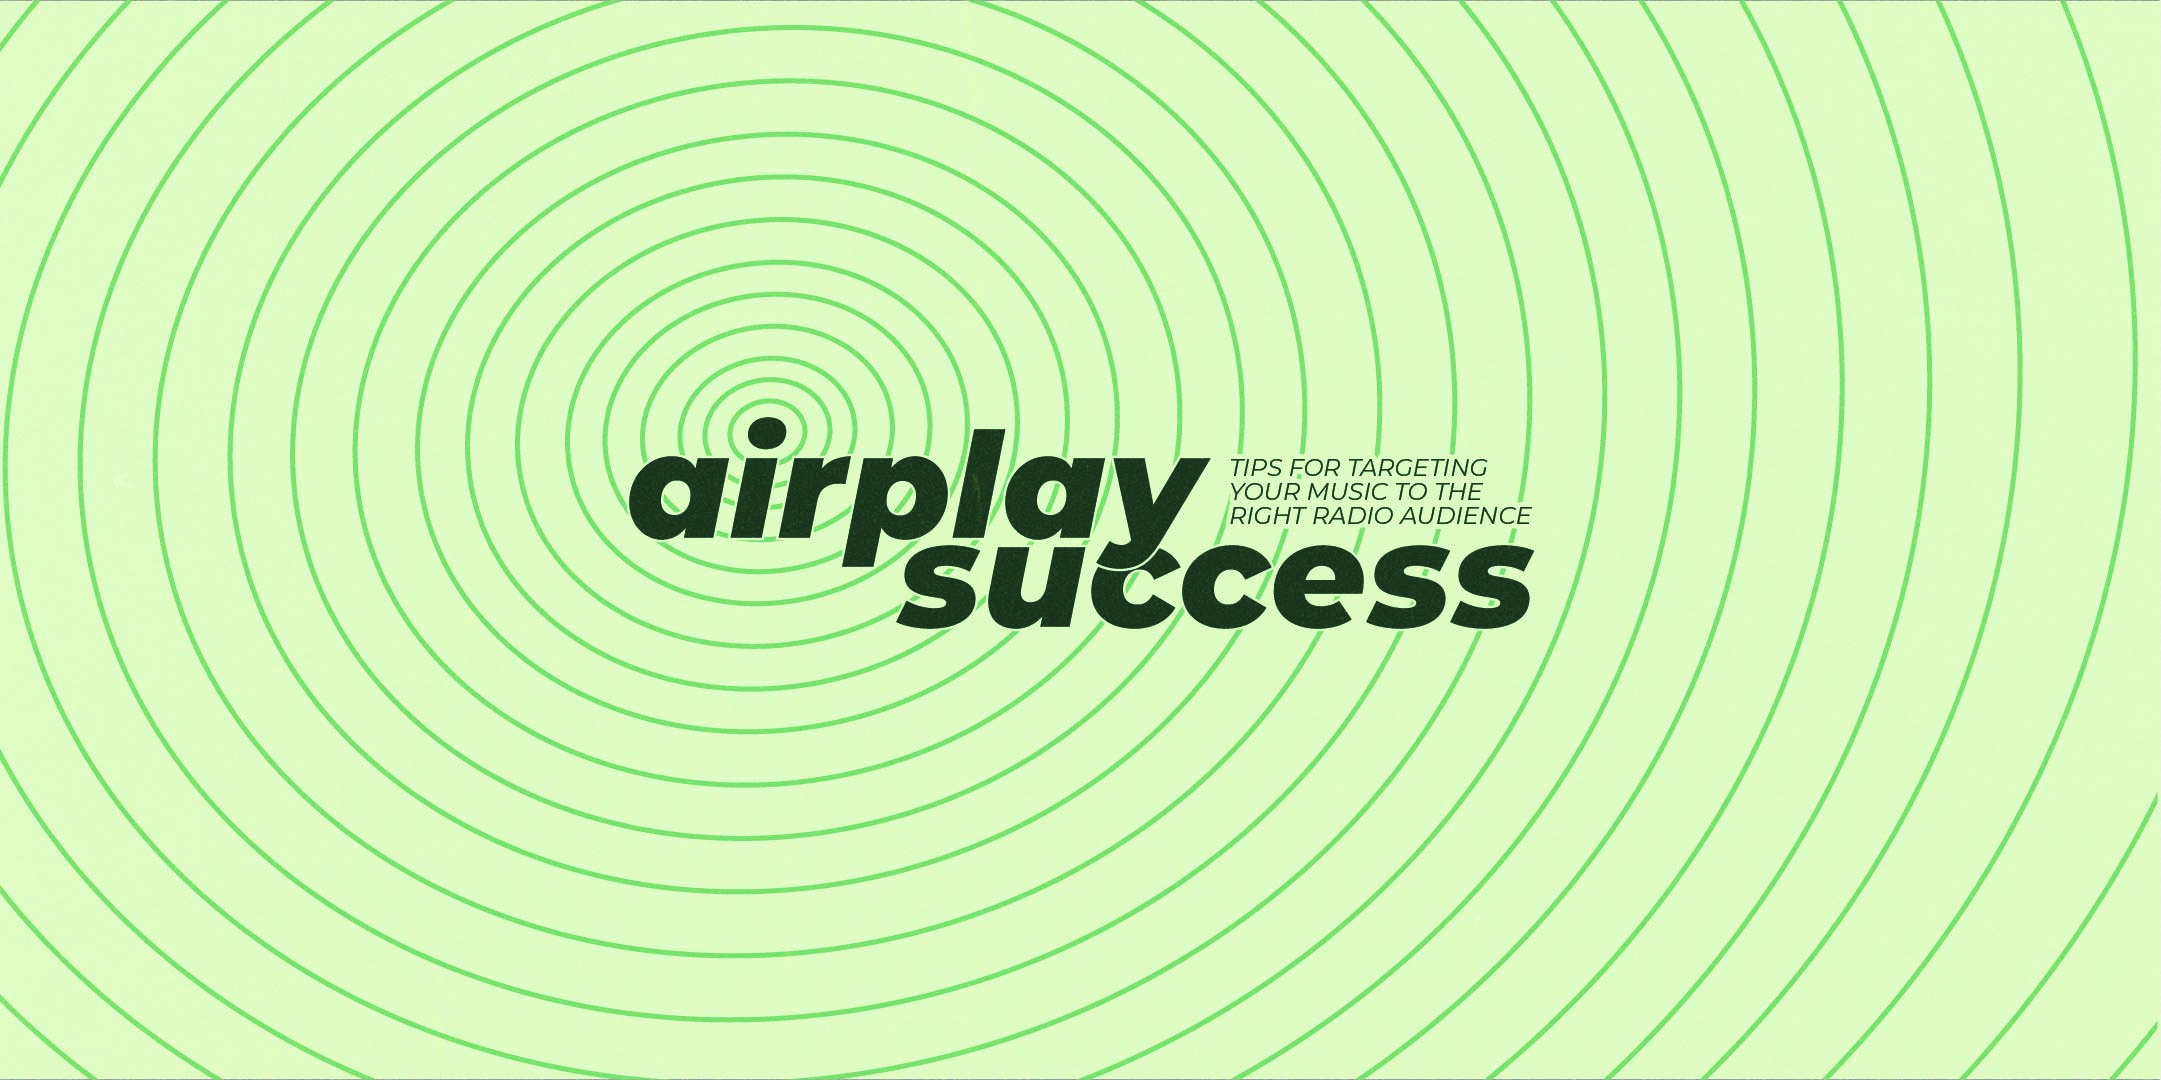 Radio Airplay: How to Get Radio Plays & Have Your Songs Heard